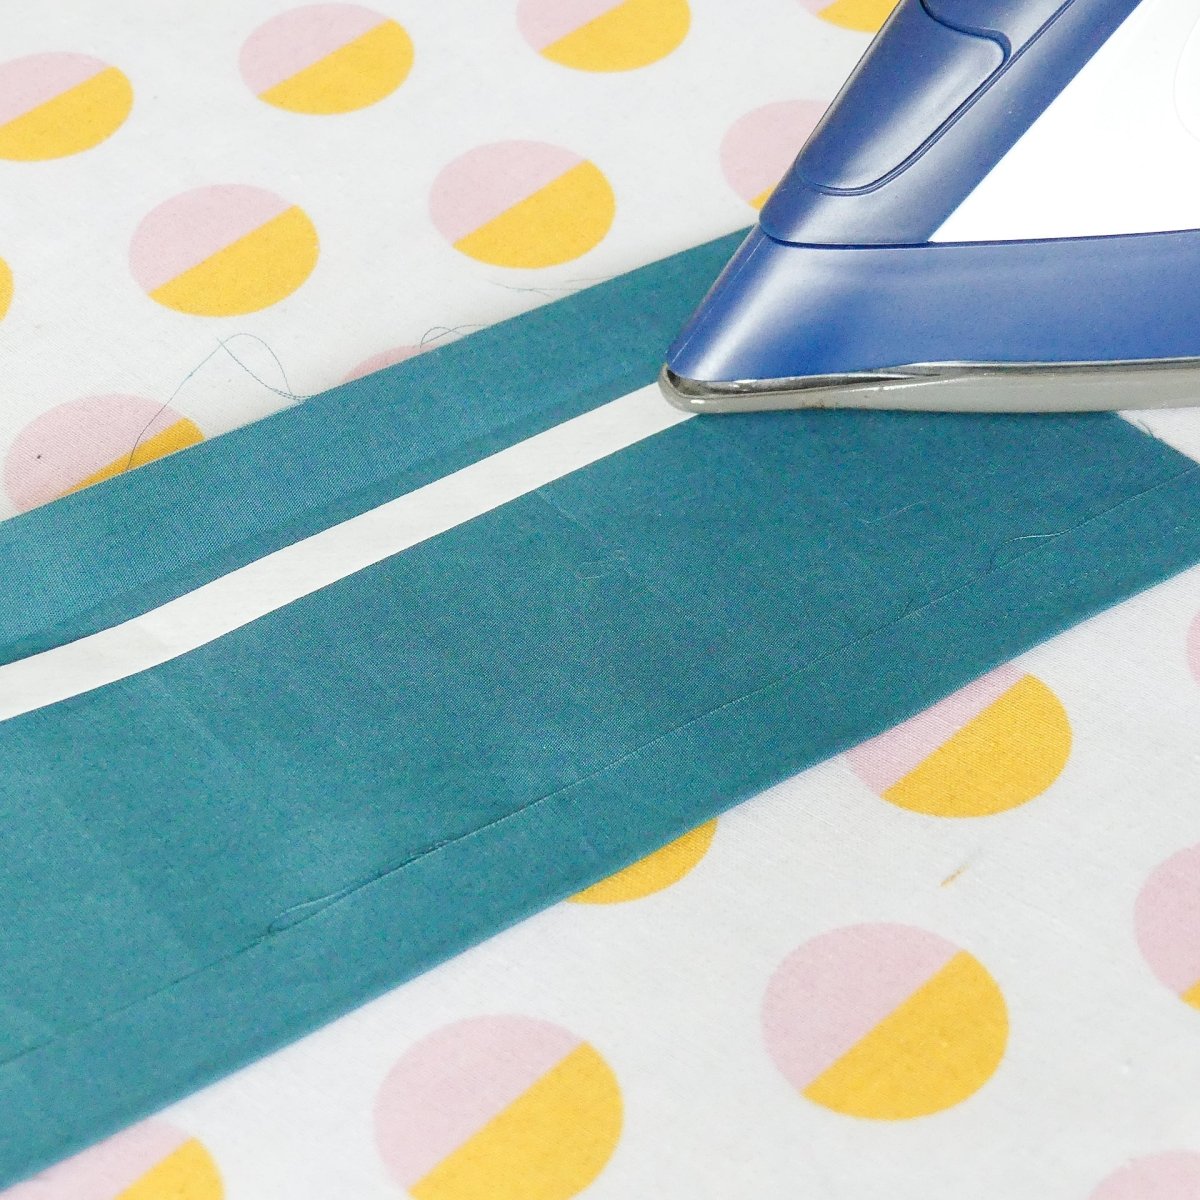 Iron the Fusible Hem Tape to your fabric